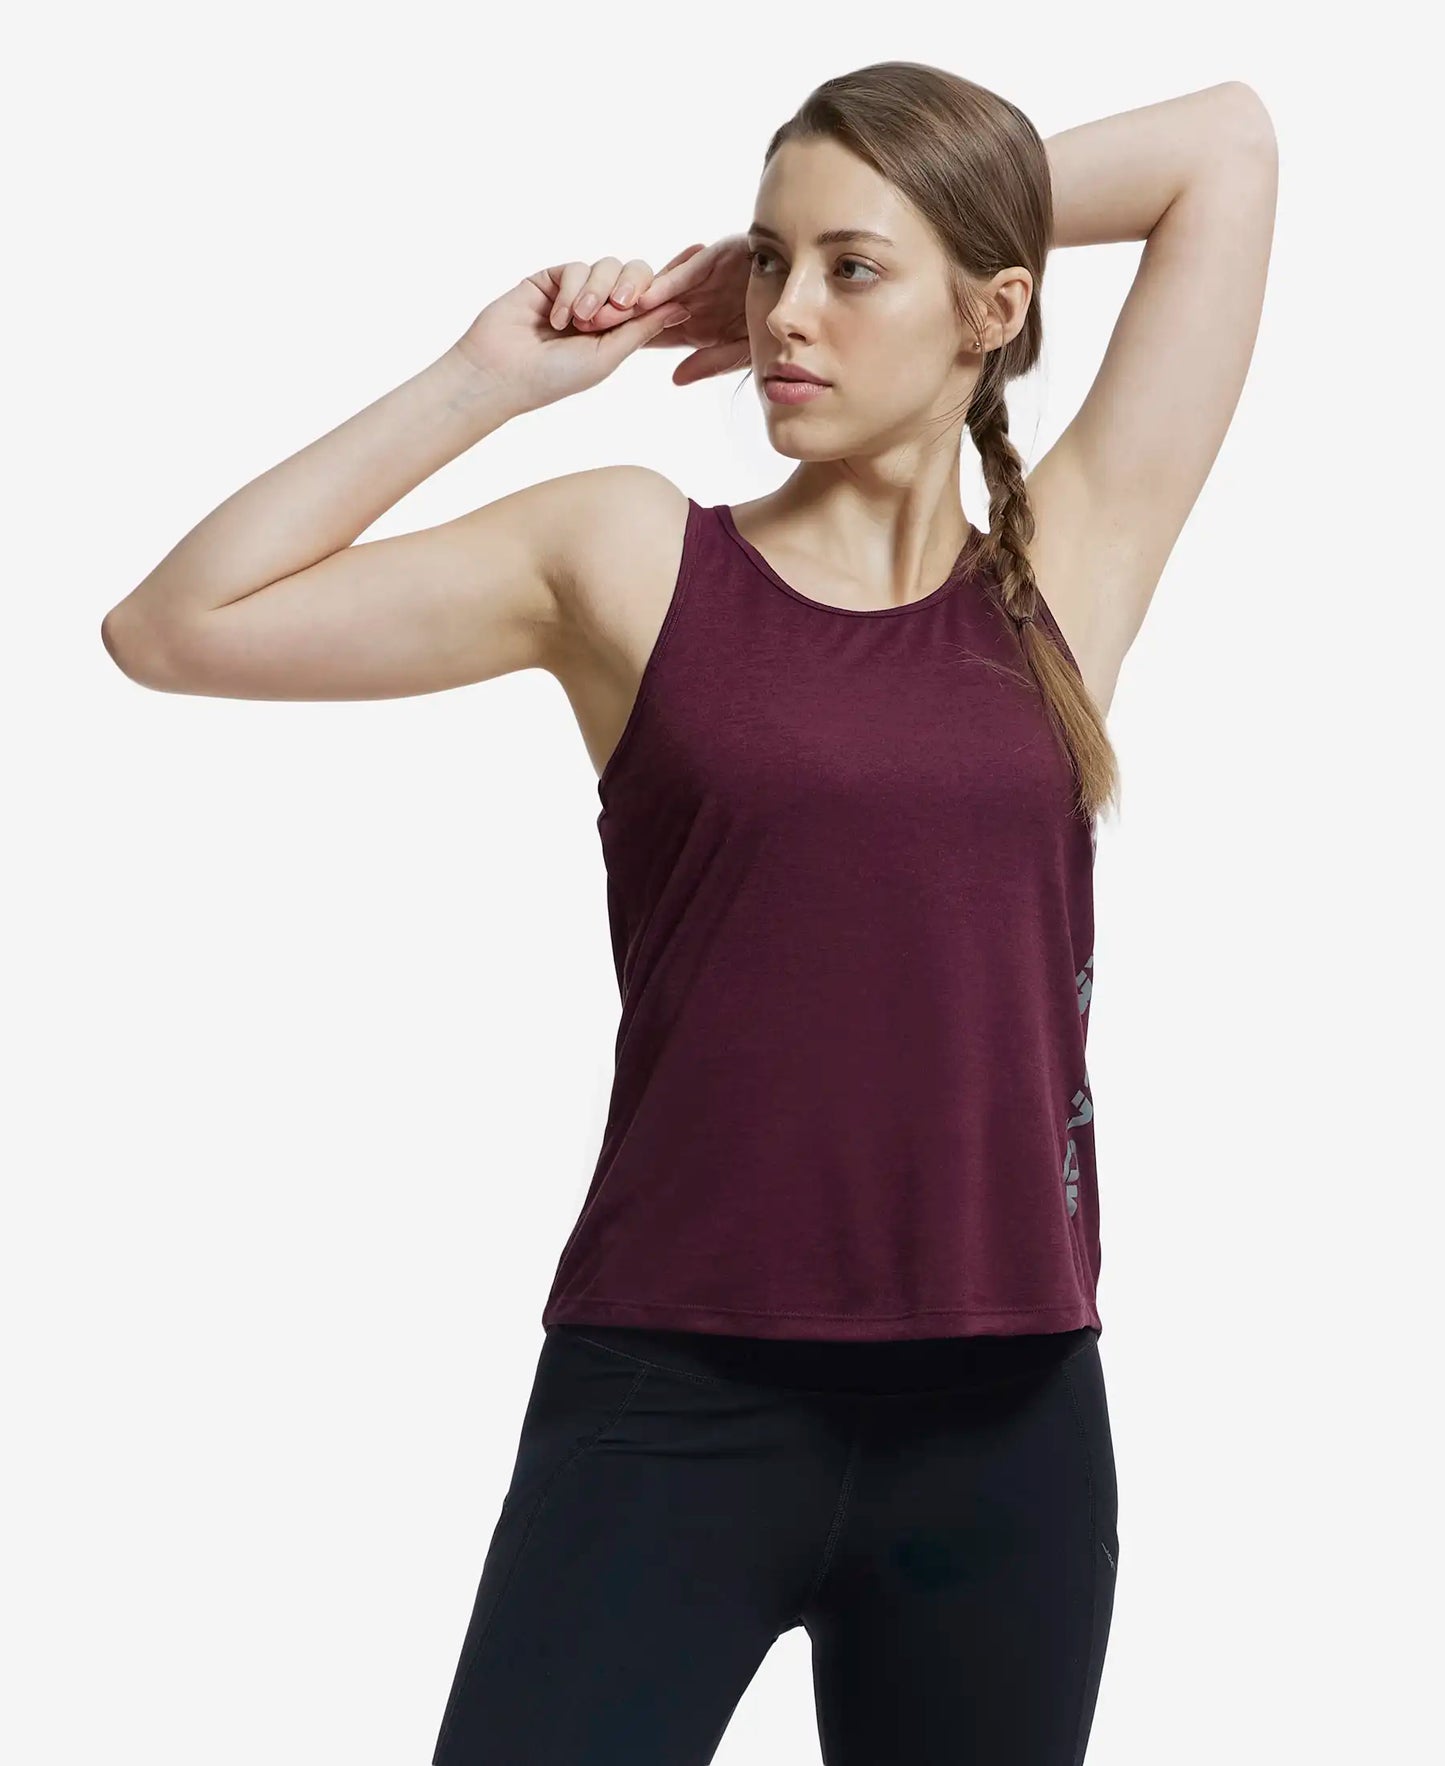 Microfiber Fabric Graphic Printed Tank Top With Breathable Mesh - Wine Tasting-5